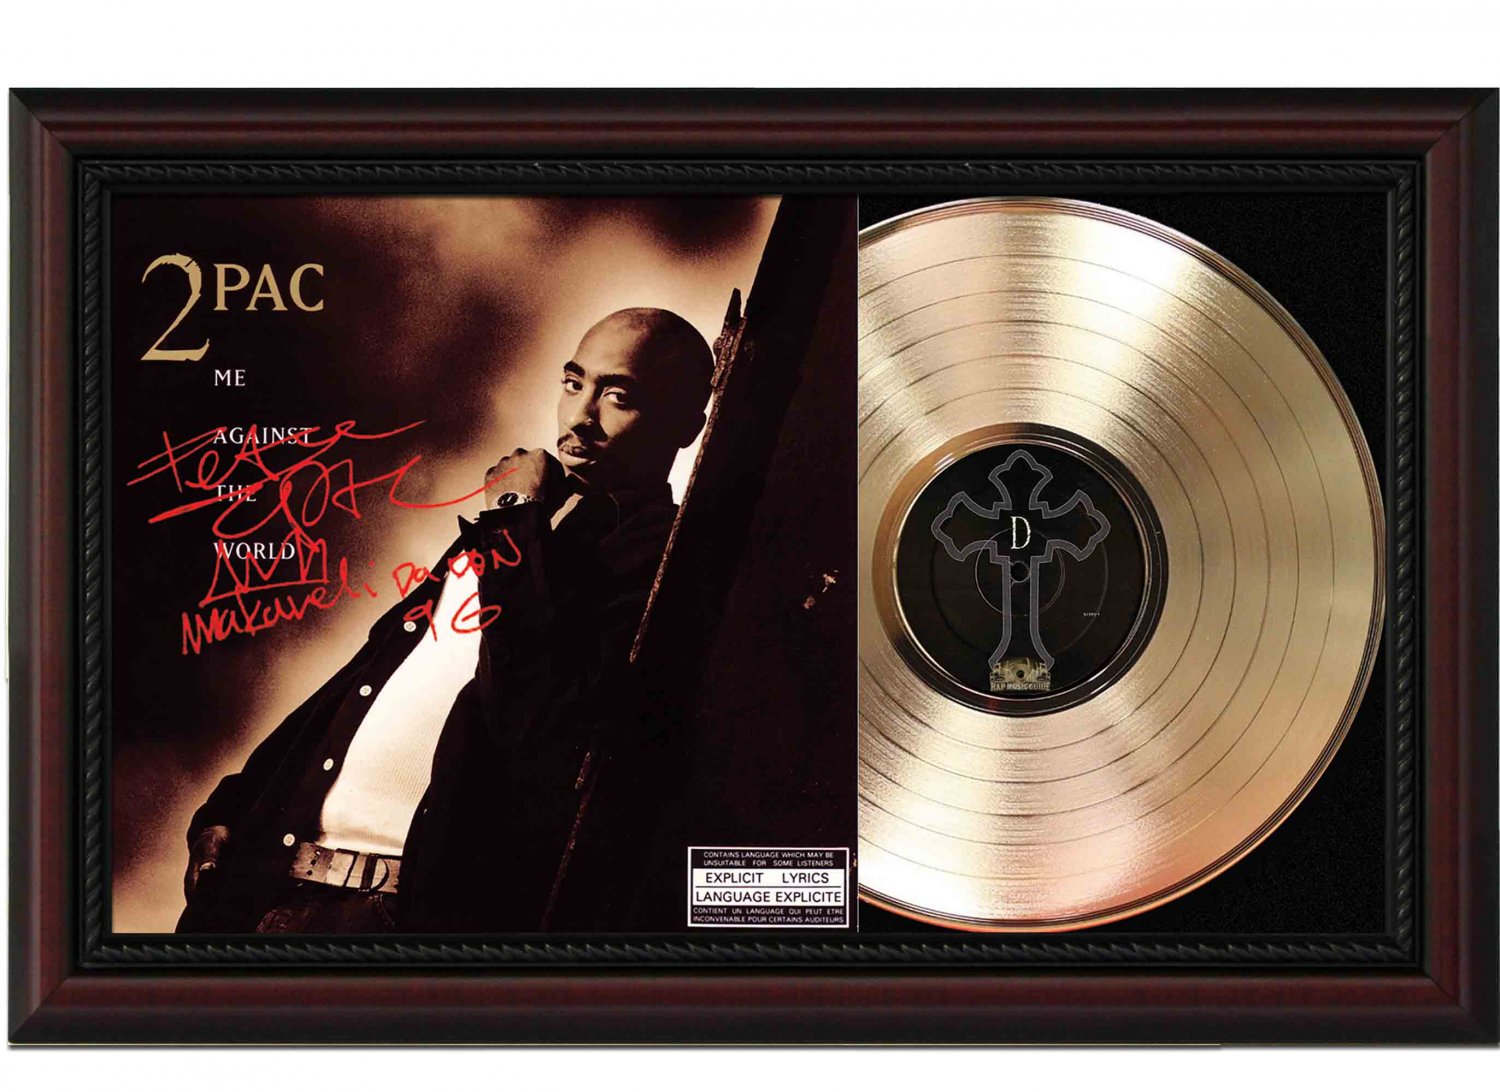 2 Pac "Me Against the World" Framed Record Display.